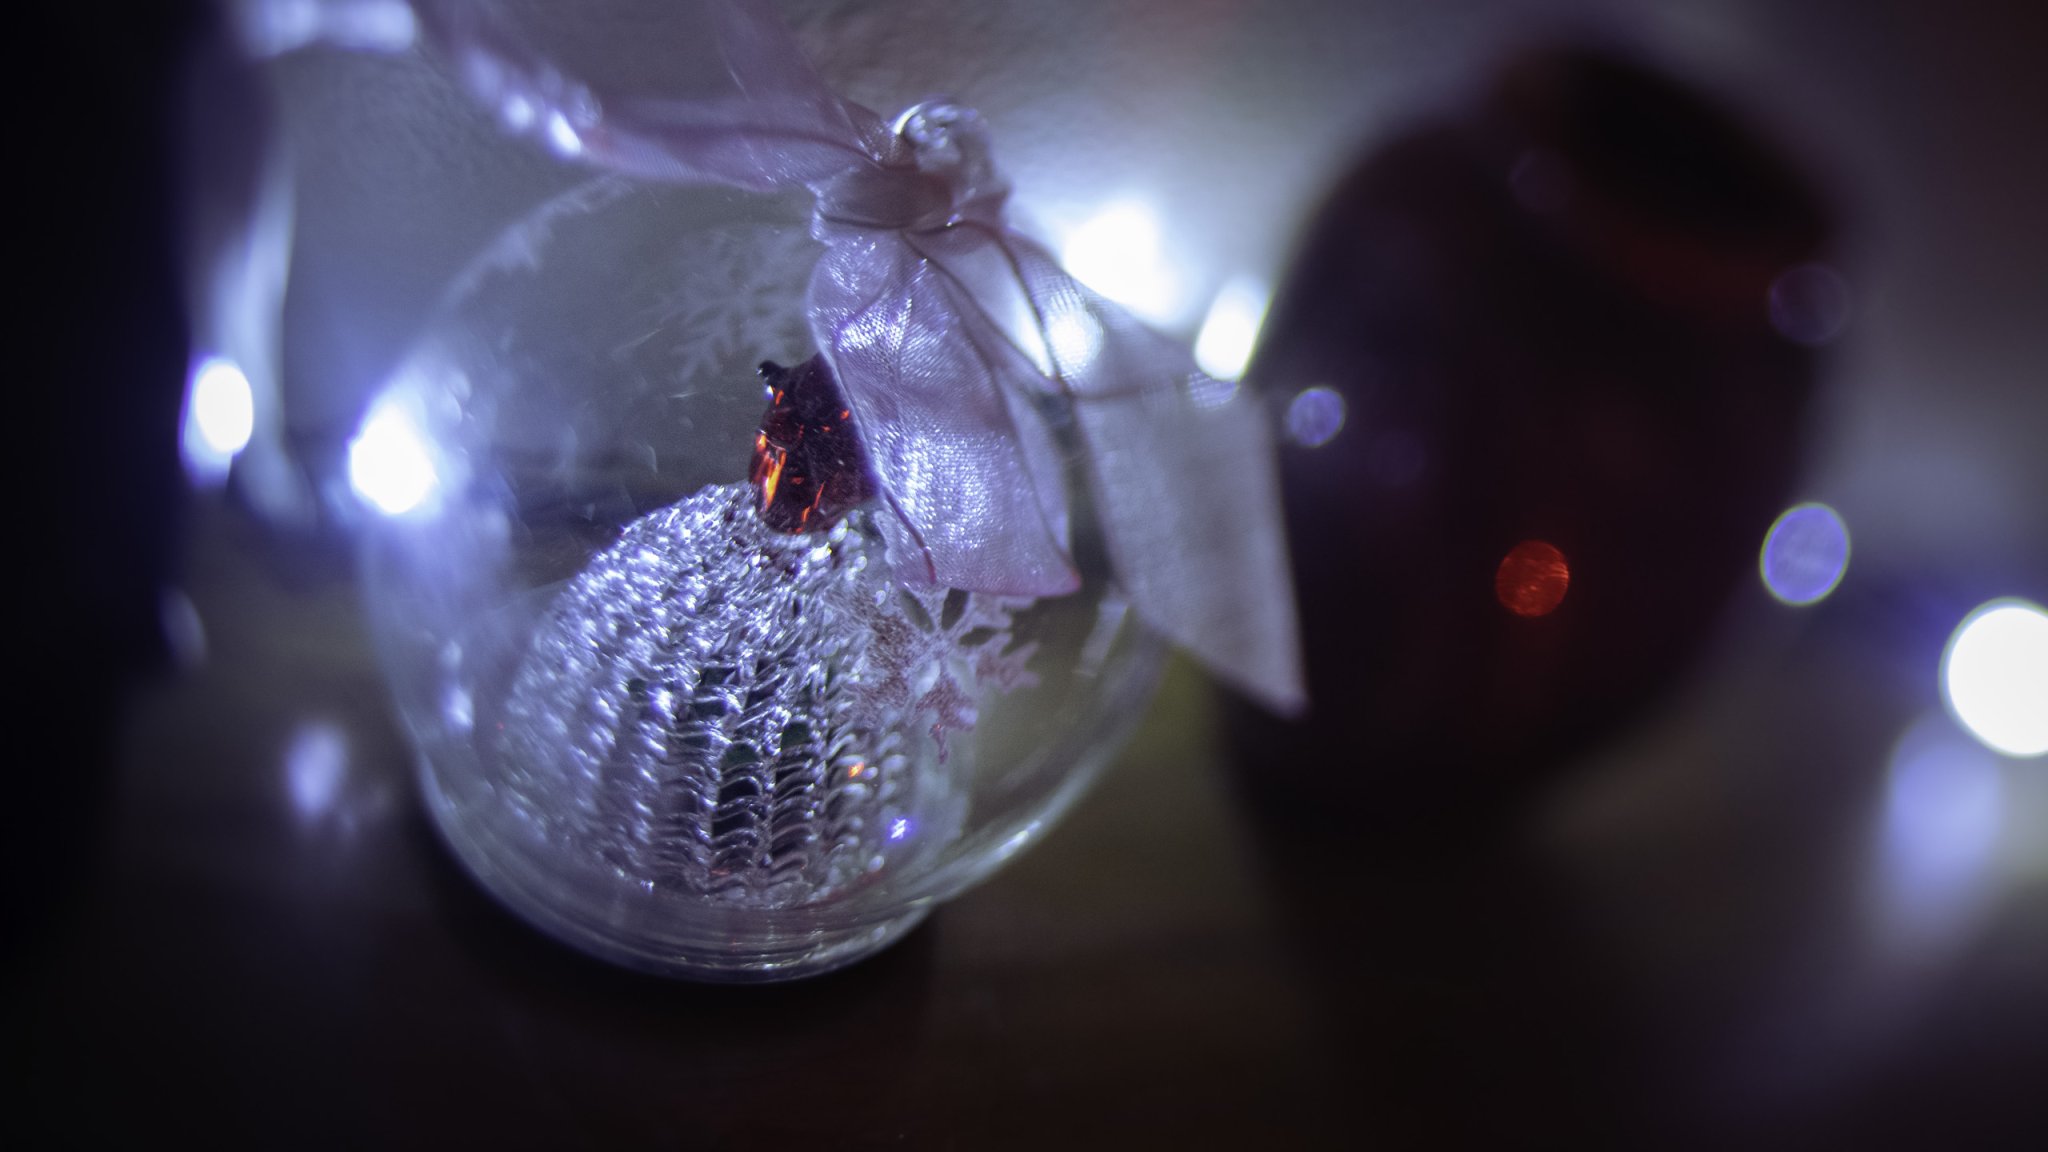 Those amazing lights: Bokeh for the holidays